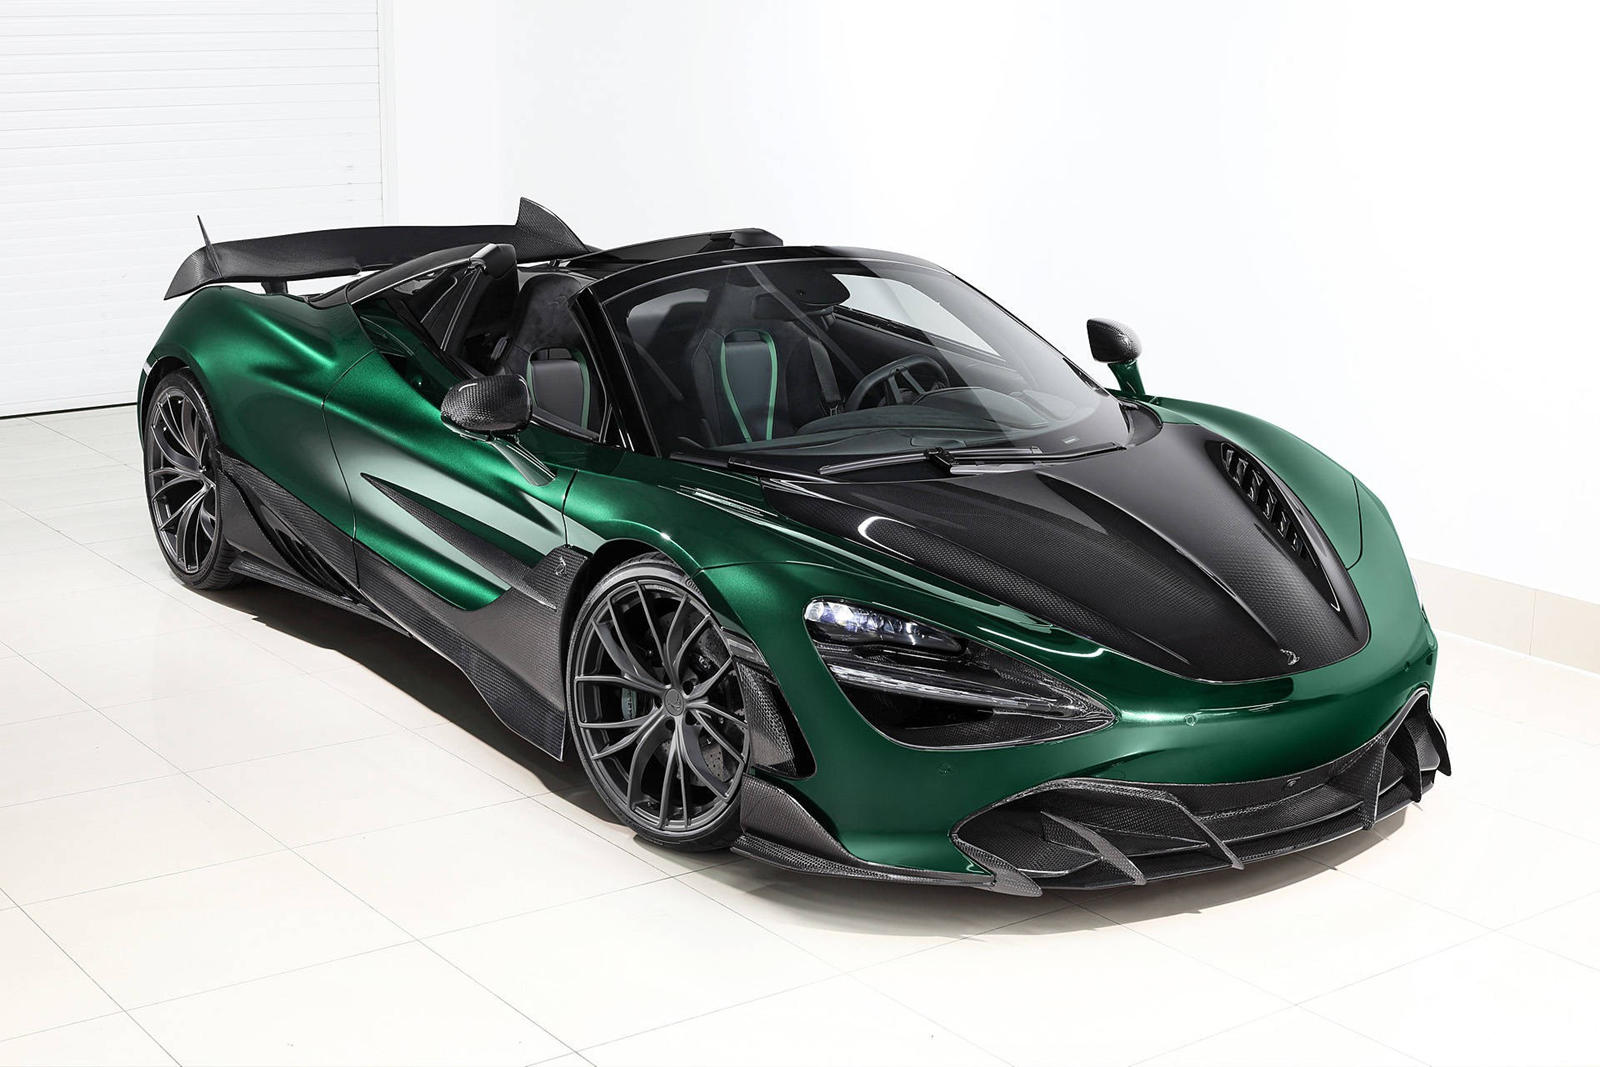 black and green 720s